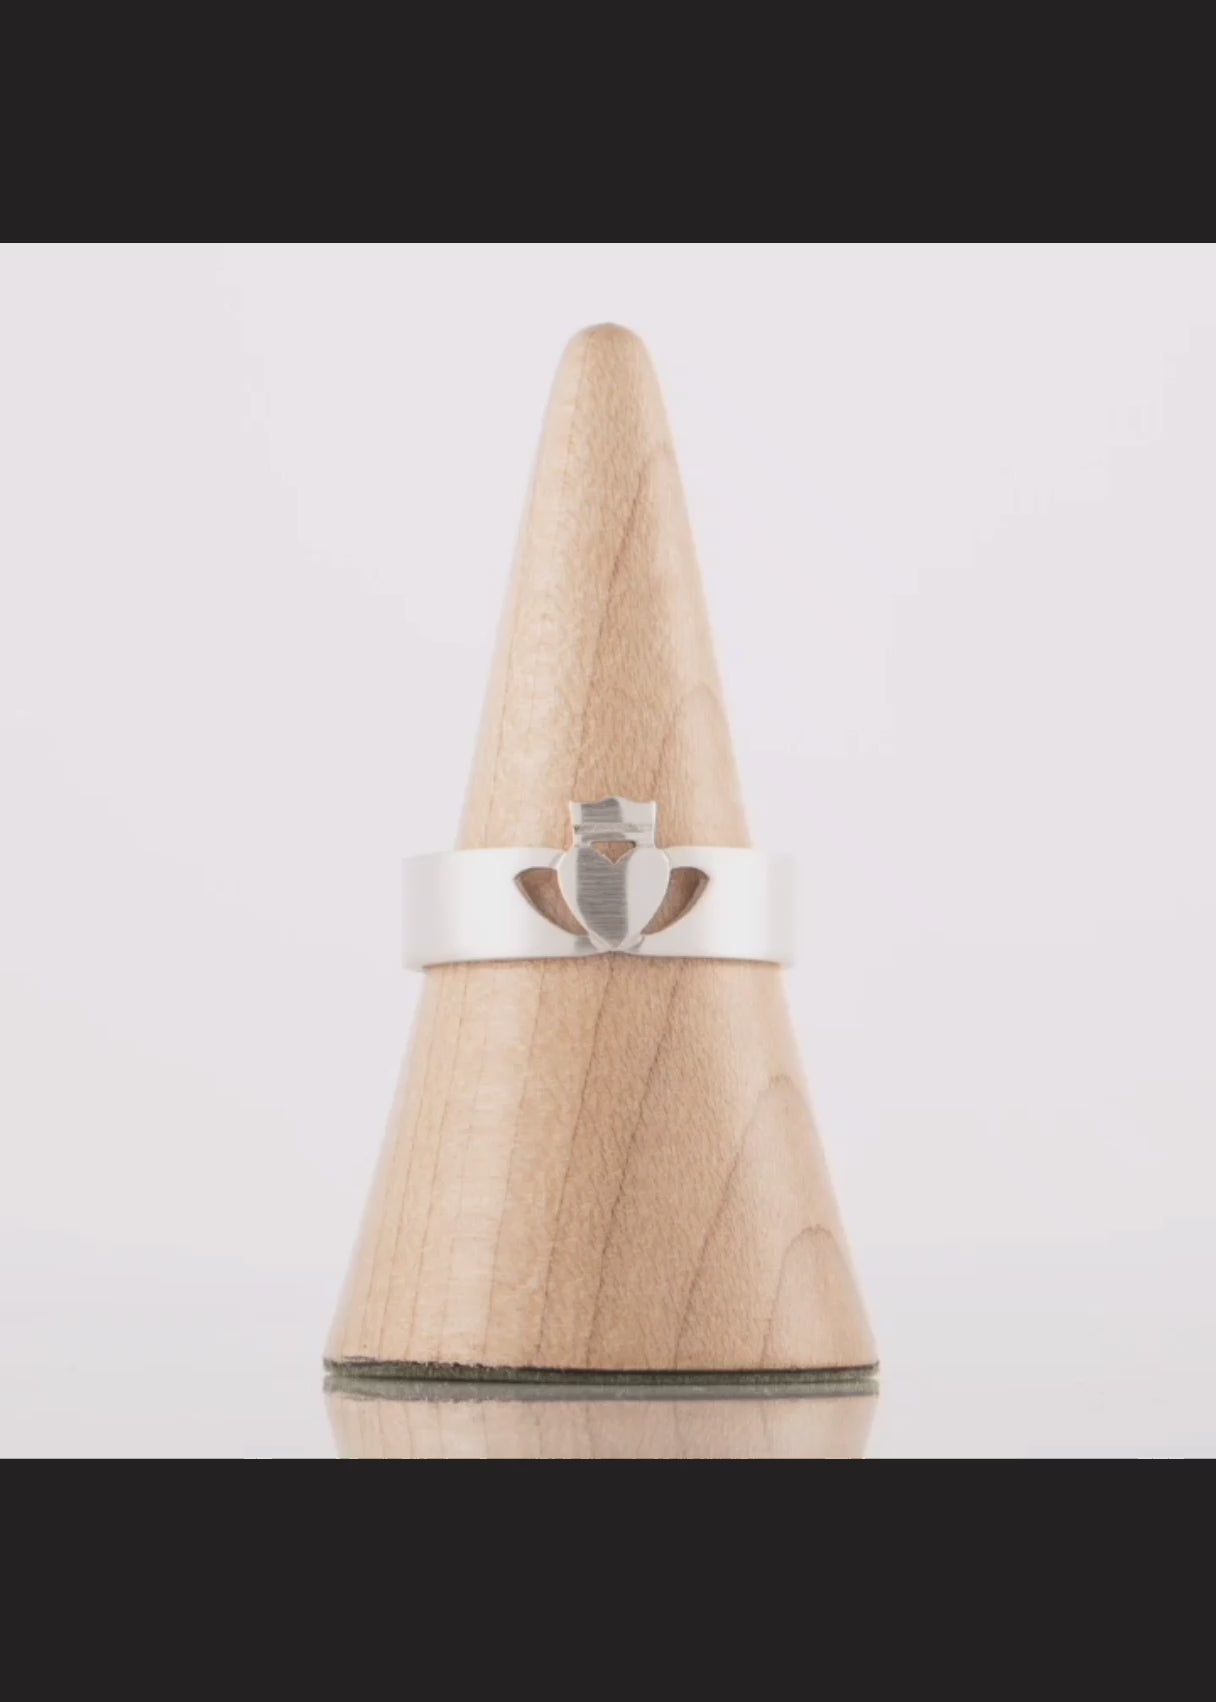 This video shows a 360 degree view of the white gold men's claddagh ring in a modern style with matte finish